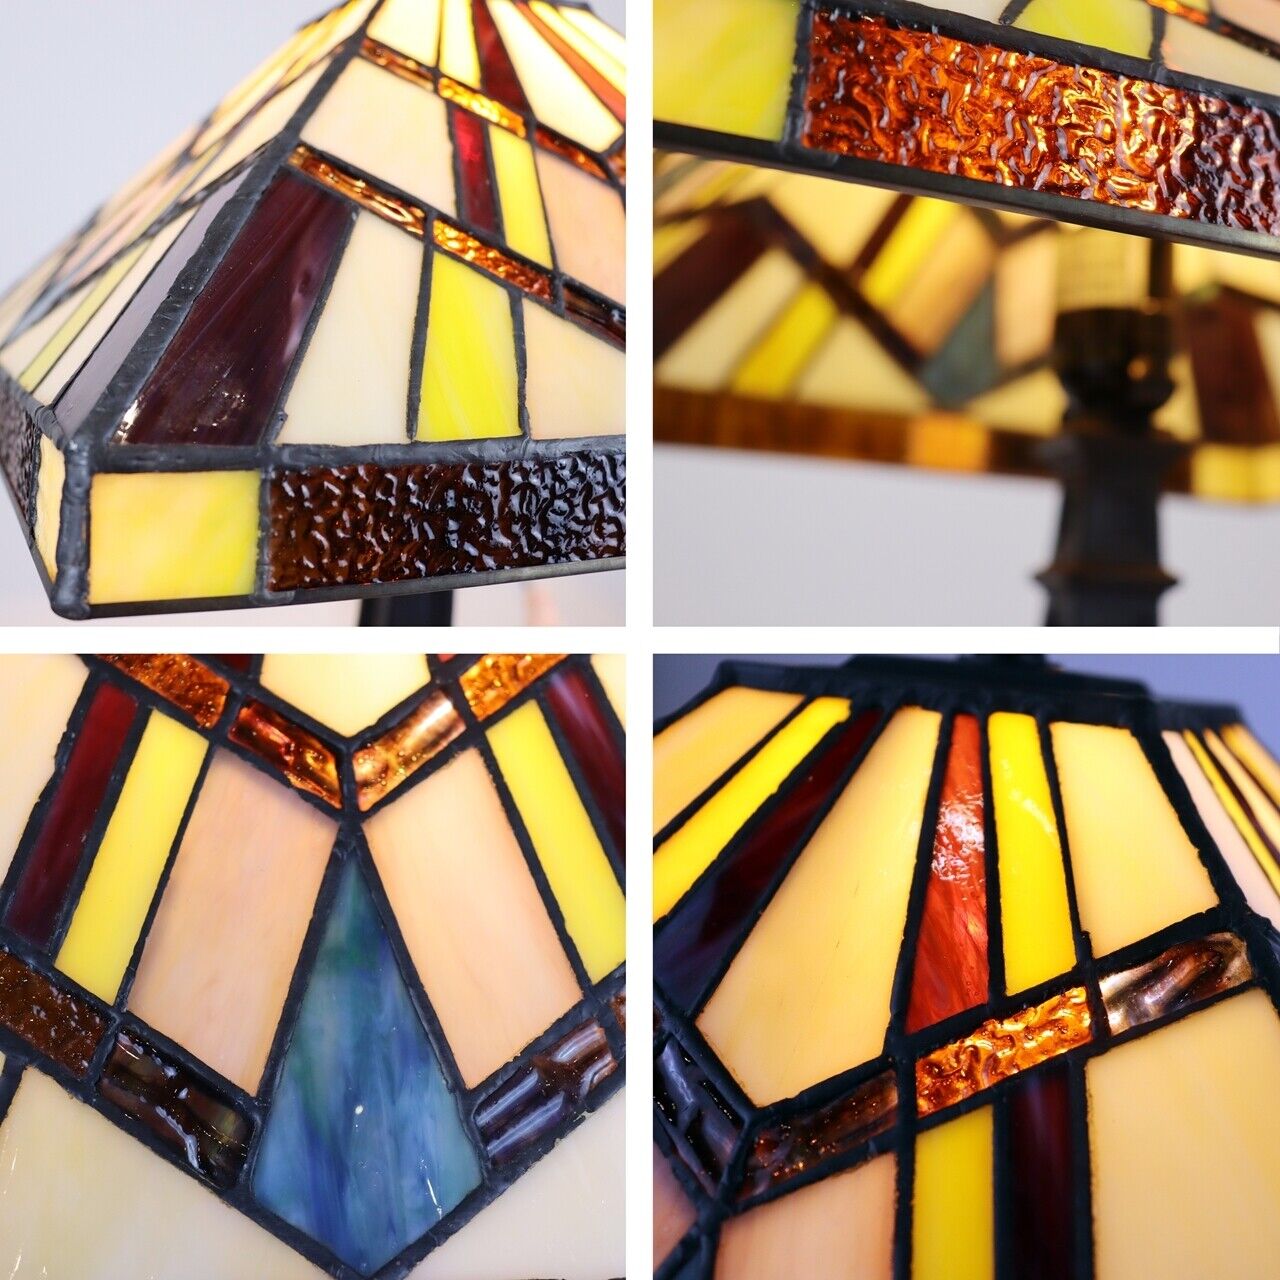 16.8" 1 light Antique Vintage Style Stained Glass Mission Table Lamp